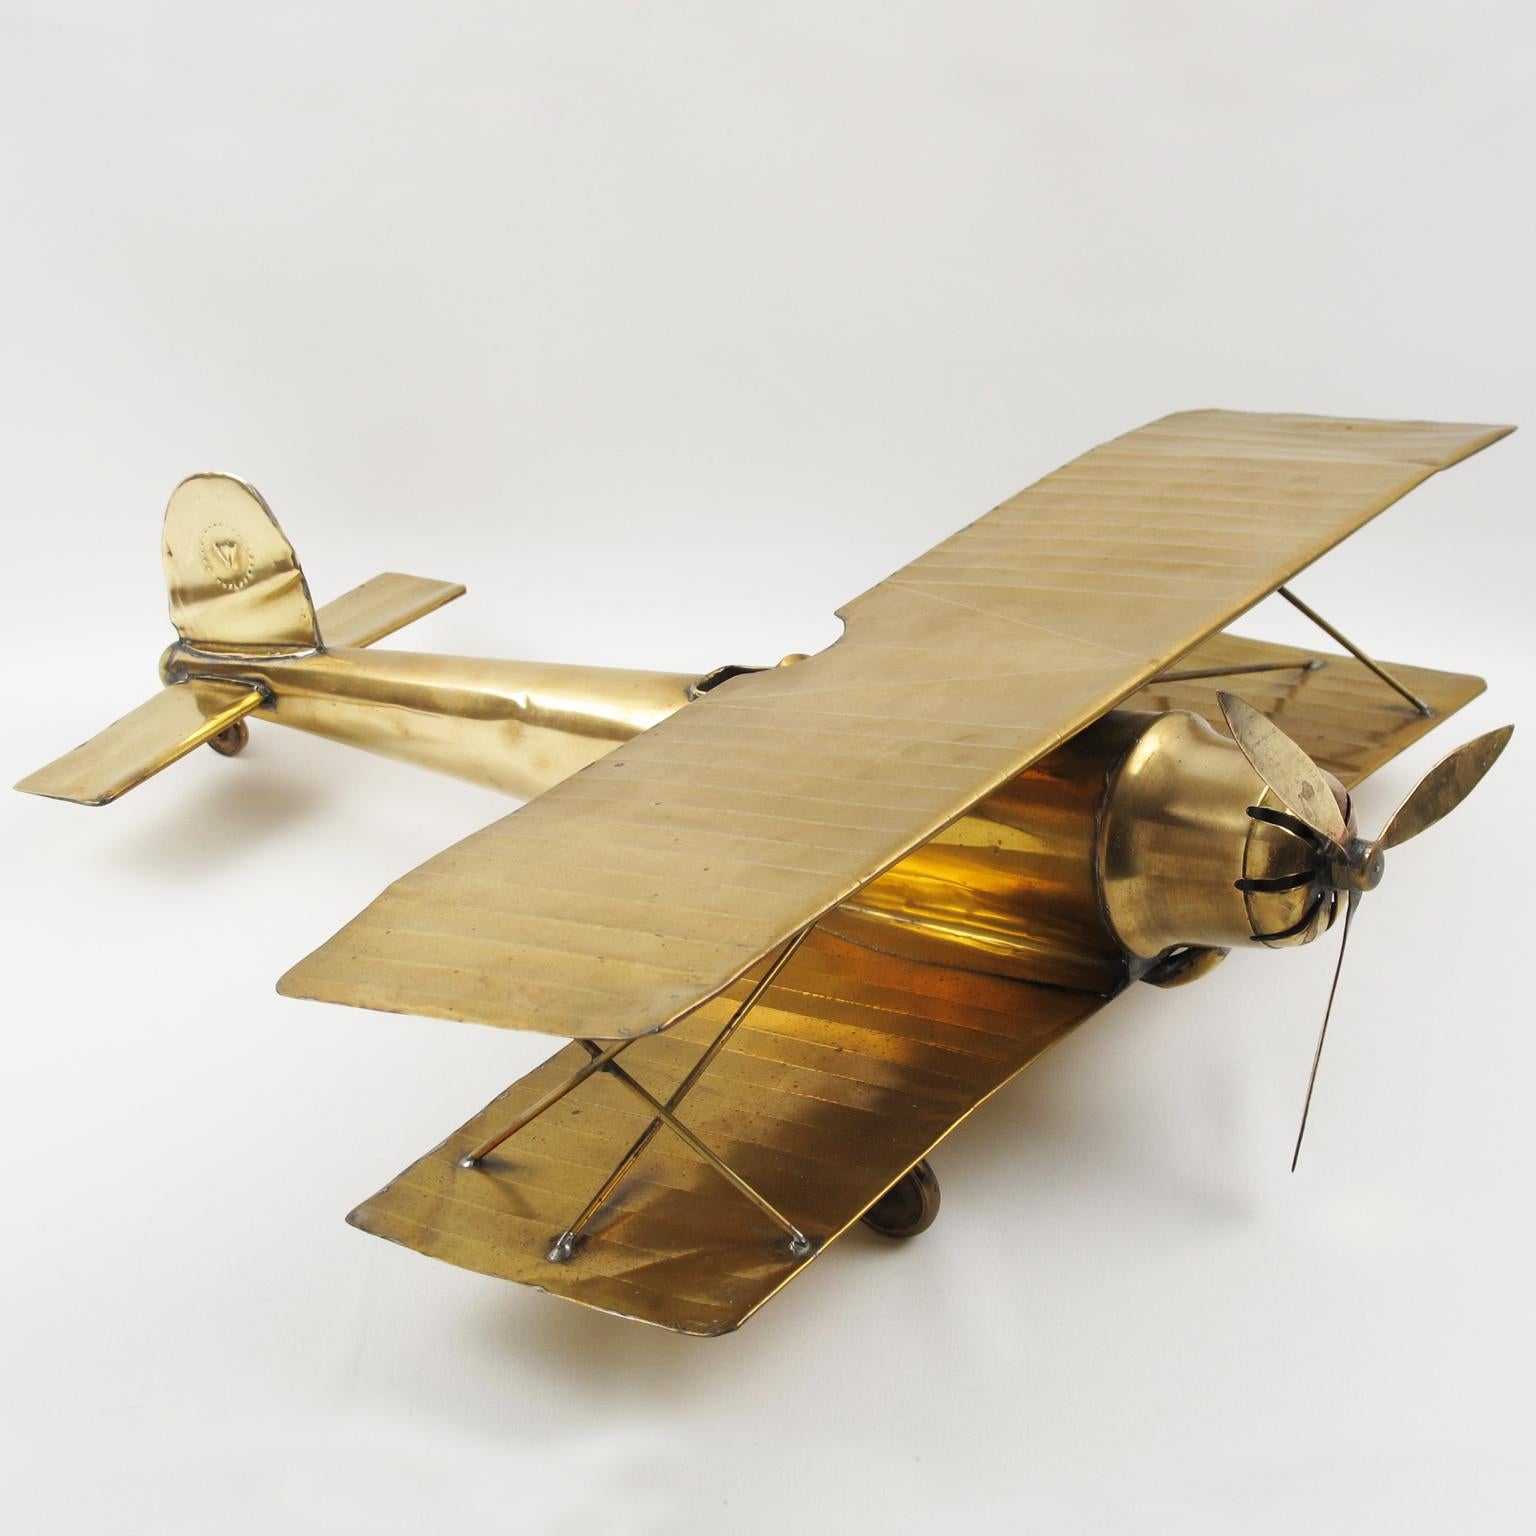 This stunning WWI-era biplane brass airplane was hand-crafted in the 1950s. It is a large-scale airplane model with intricate details and looks great hung from a ceiling or displayed on a desk. The single brass propeller is in rotating condition.